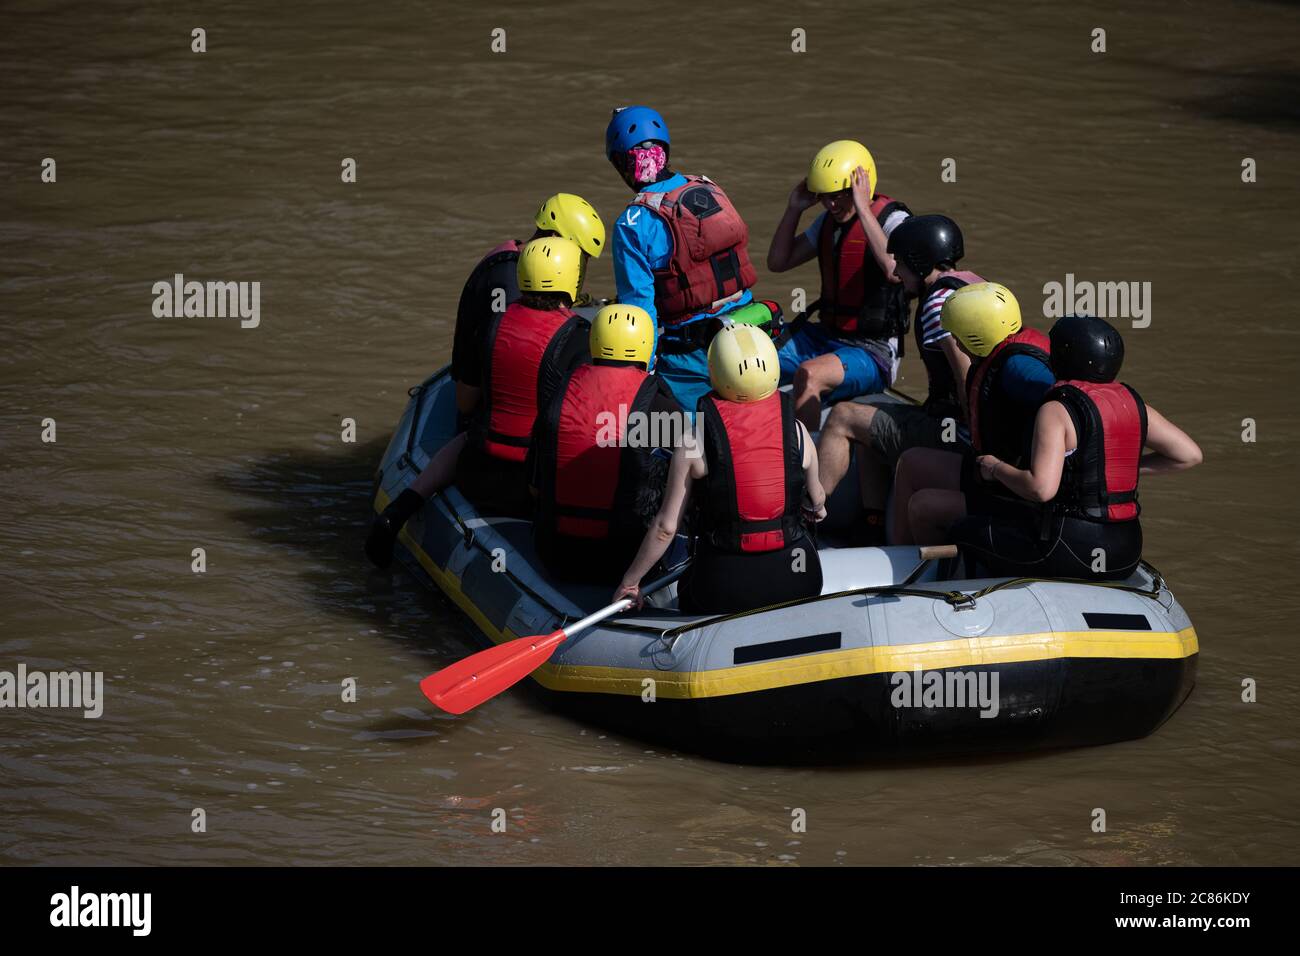 Rafting boat stopped in a murky water to regain the team members strenght for a crazy adventure down the river Stock Photo